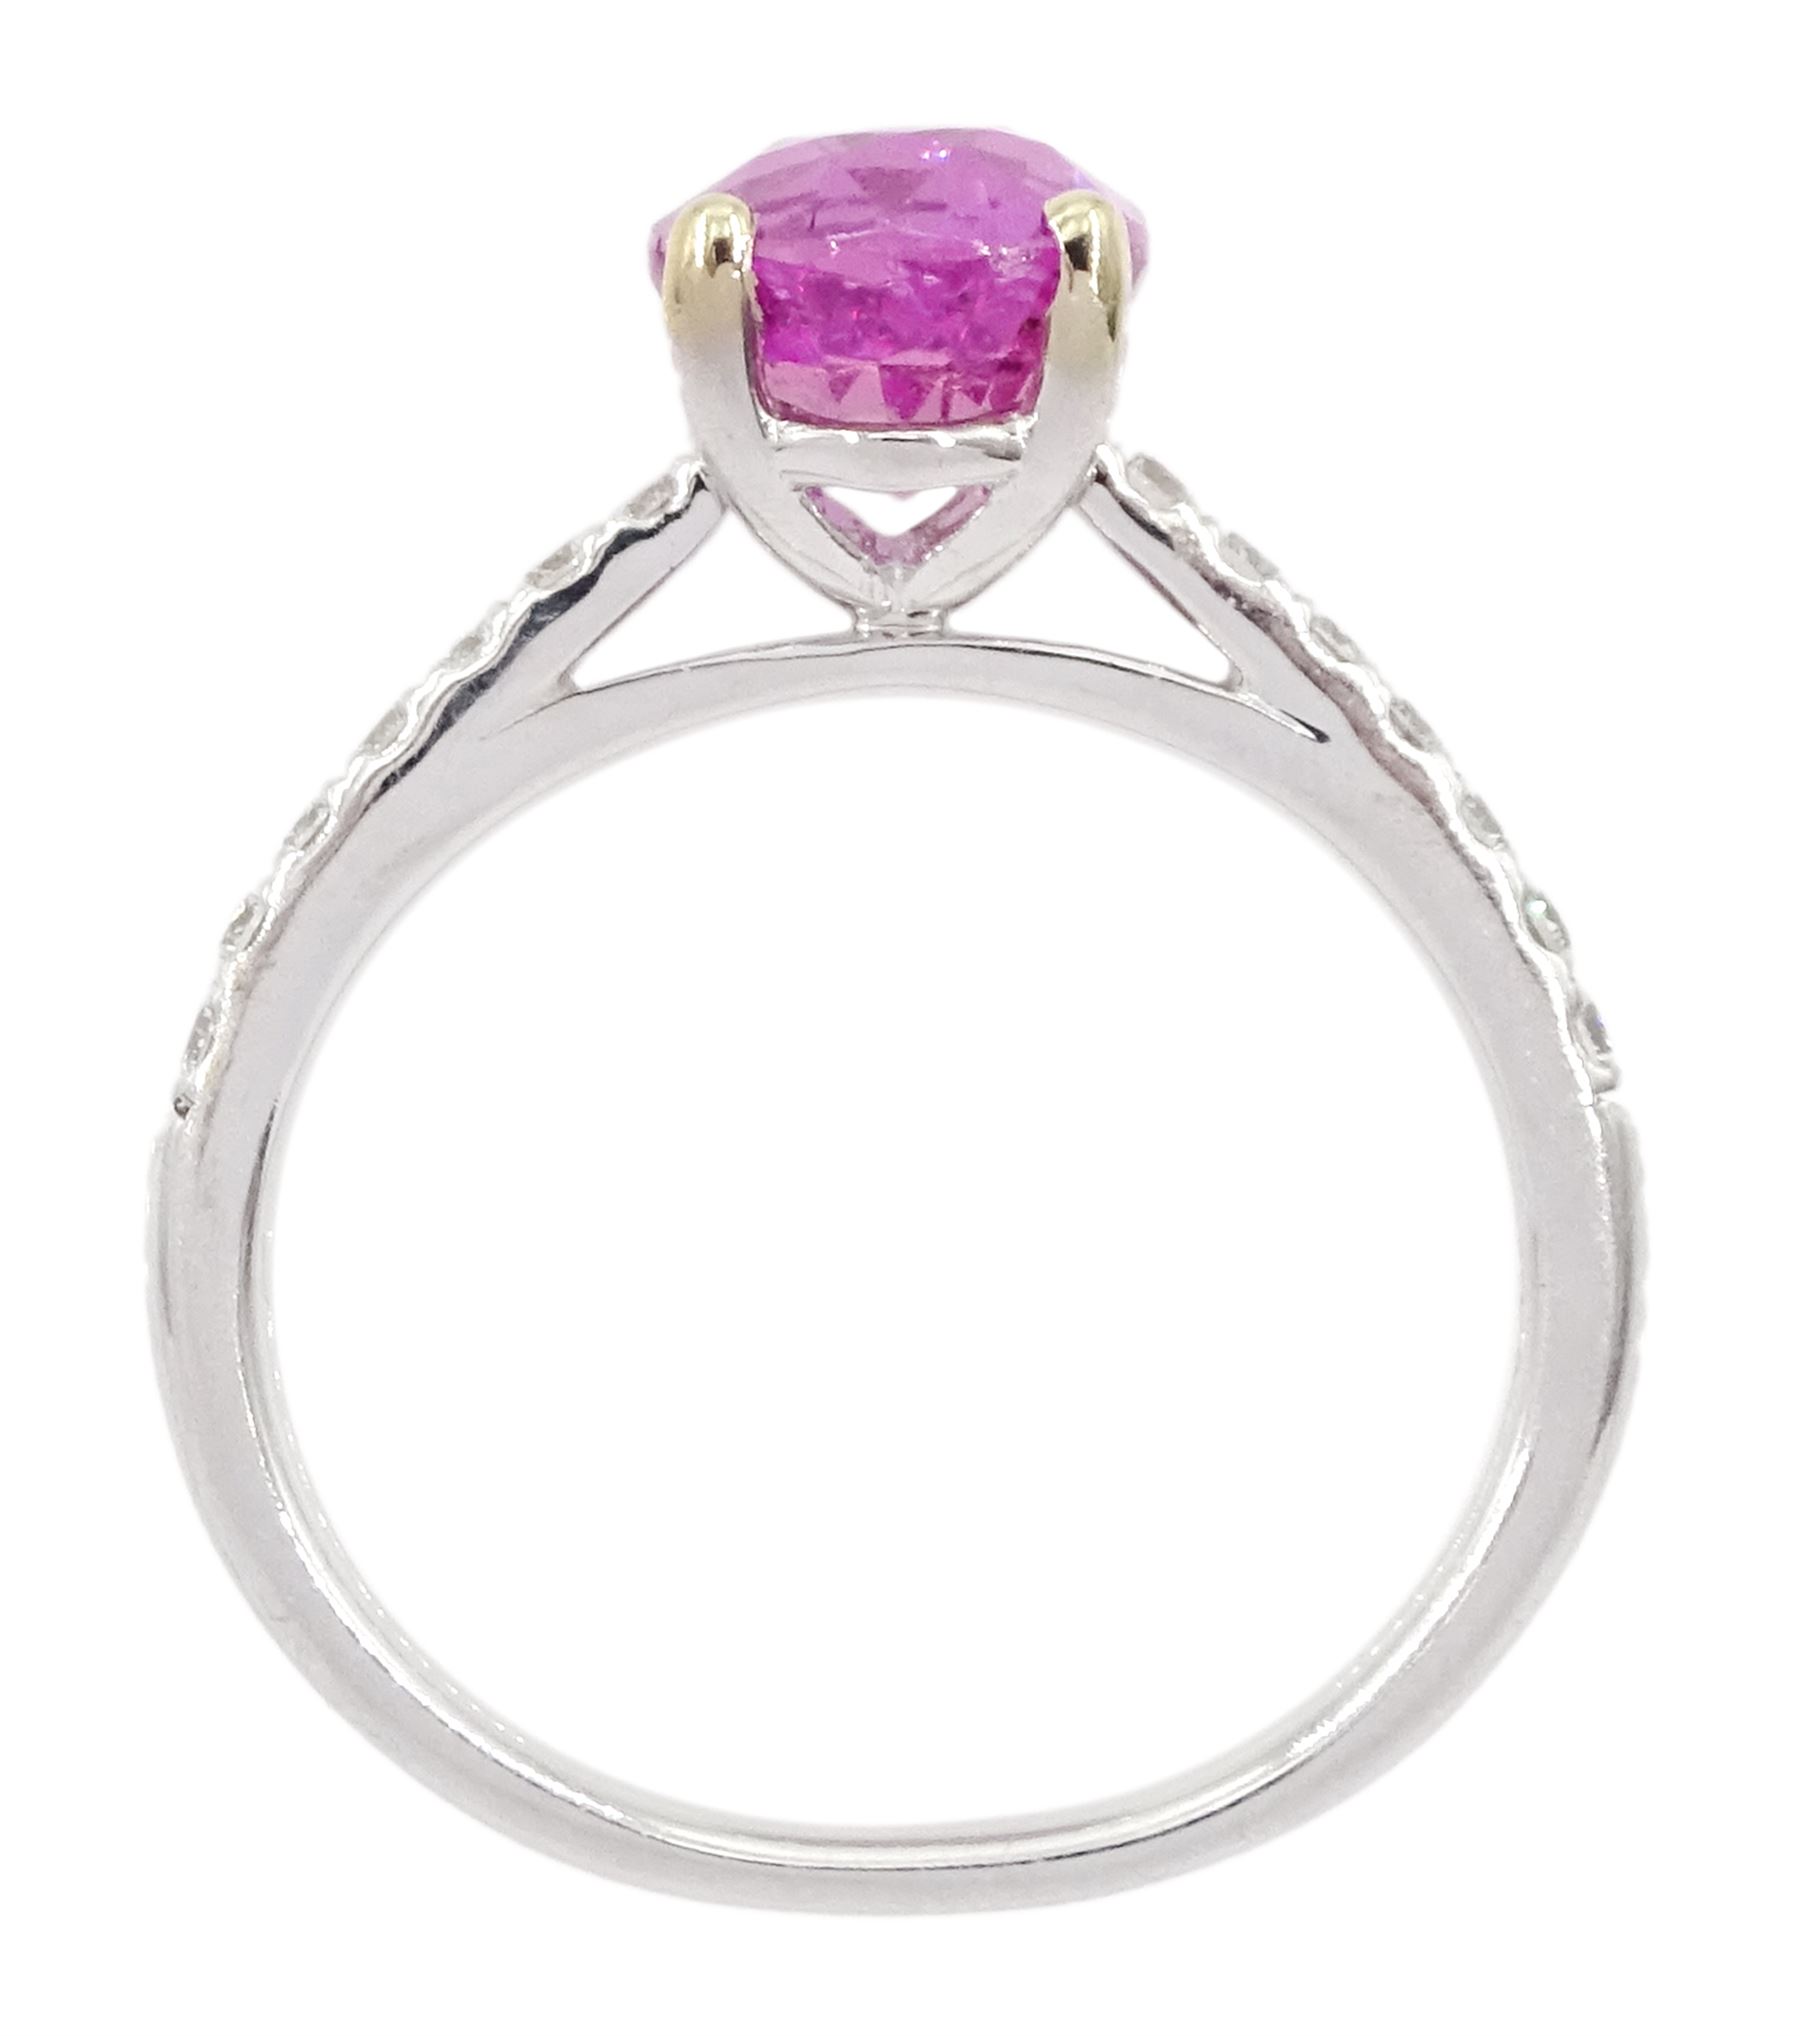 18ct white gold oval cut pink sapphire ring - Image 4 of 4